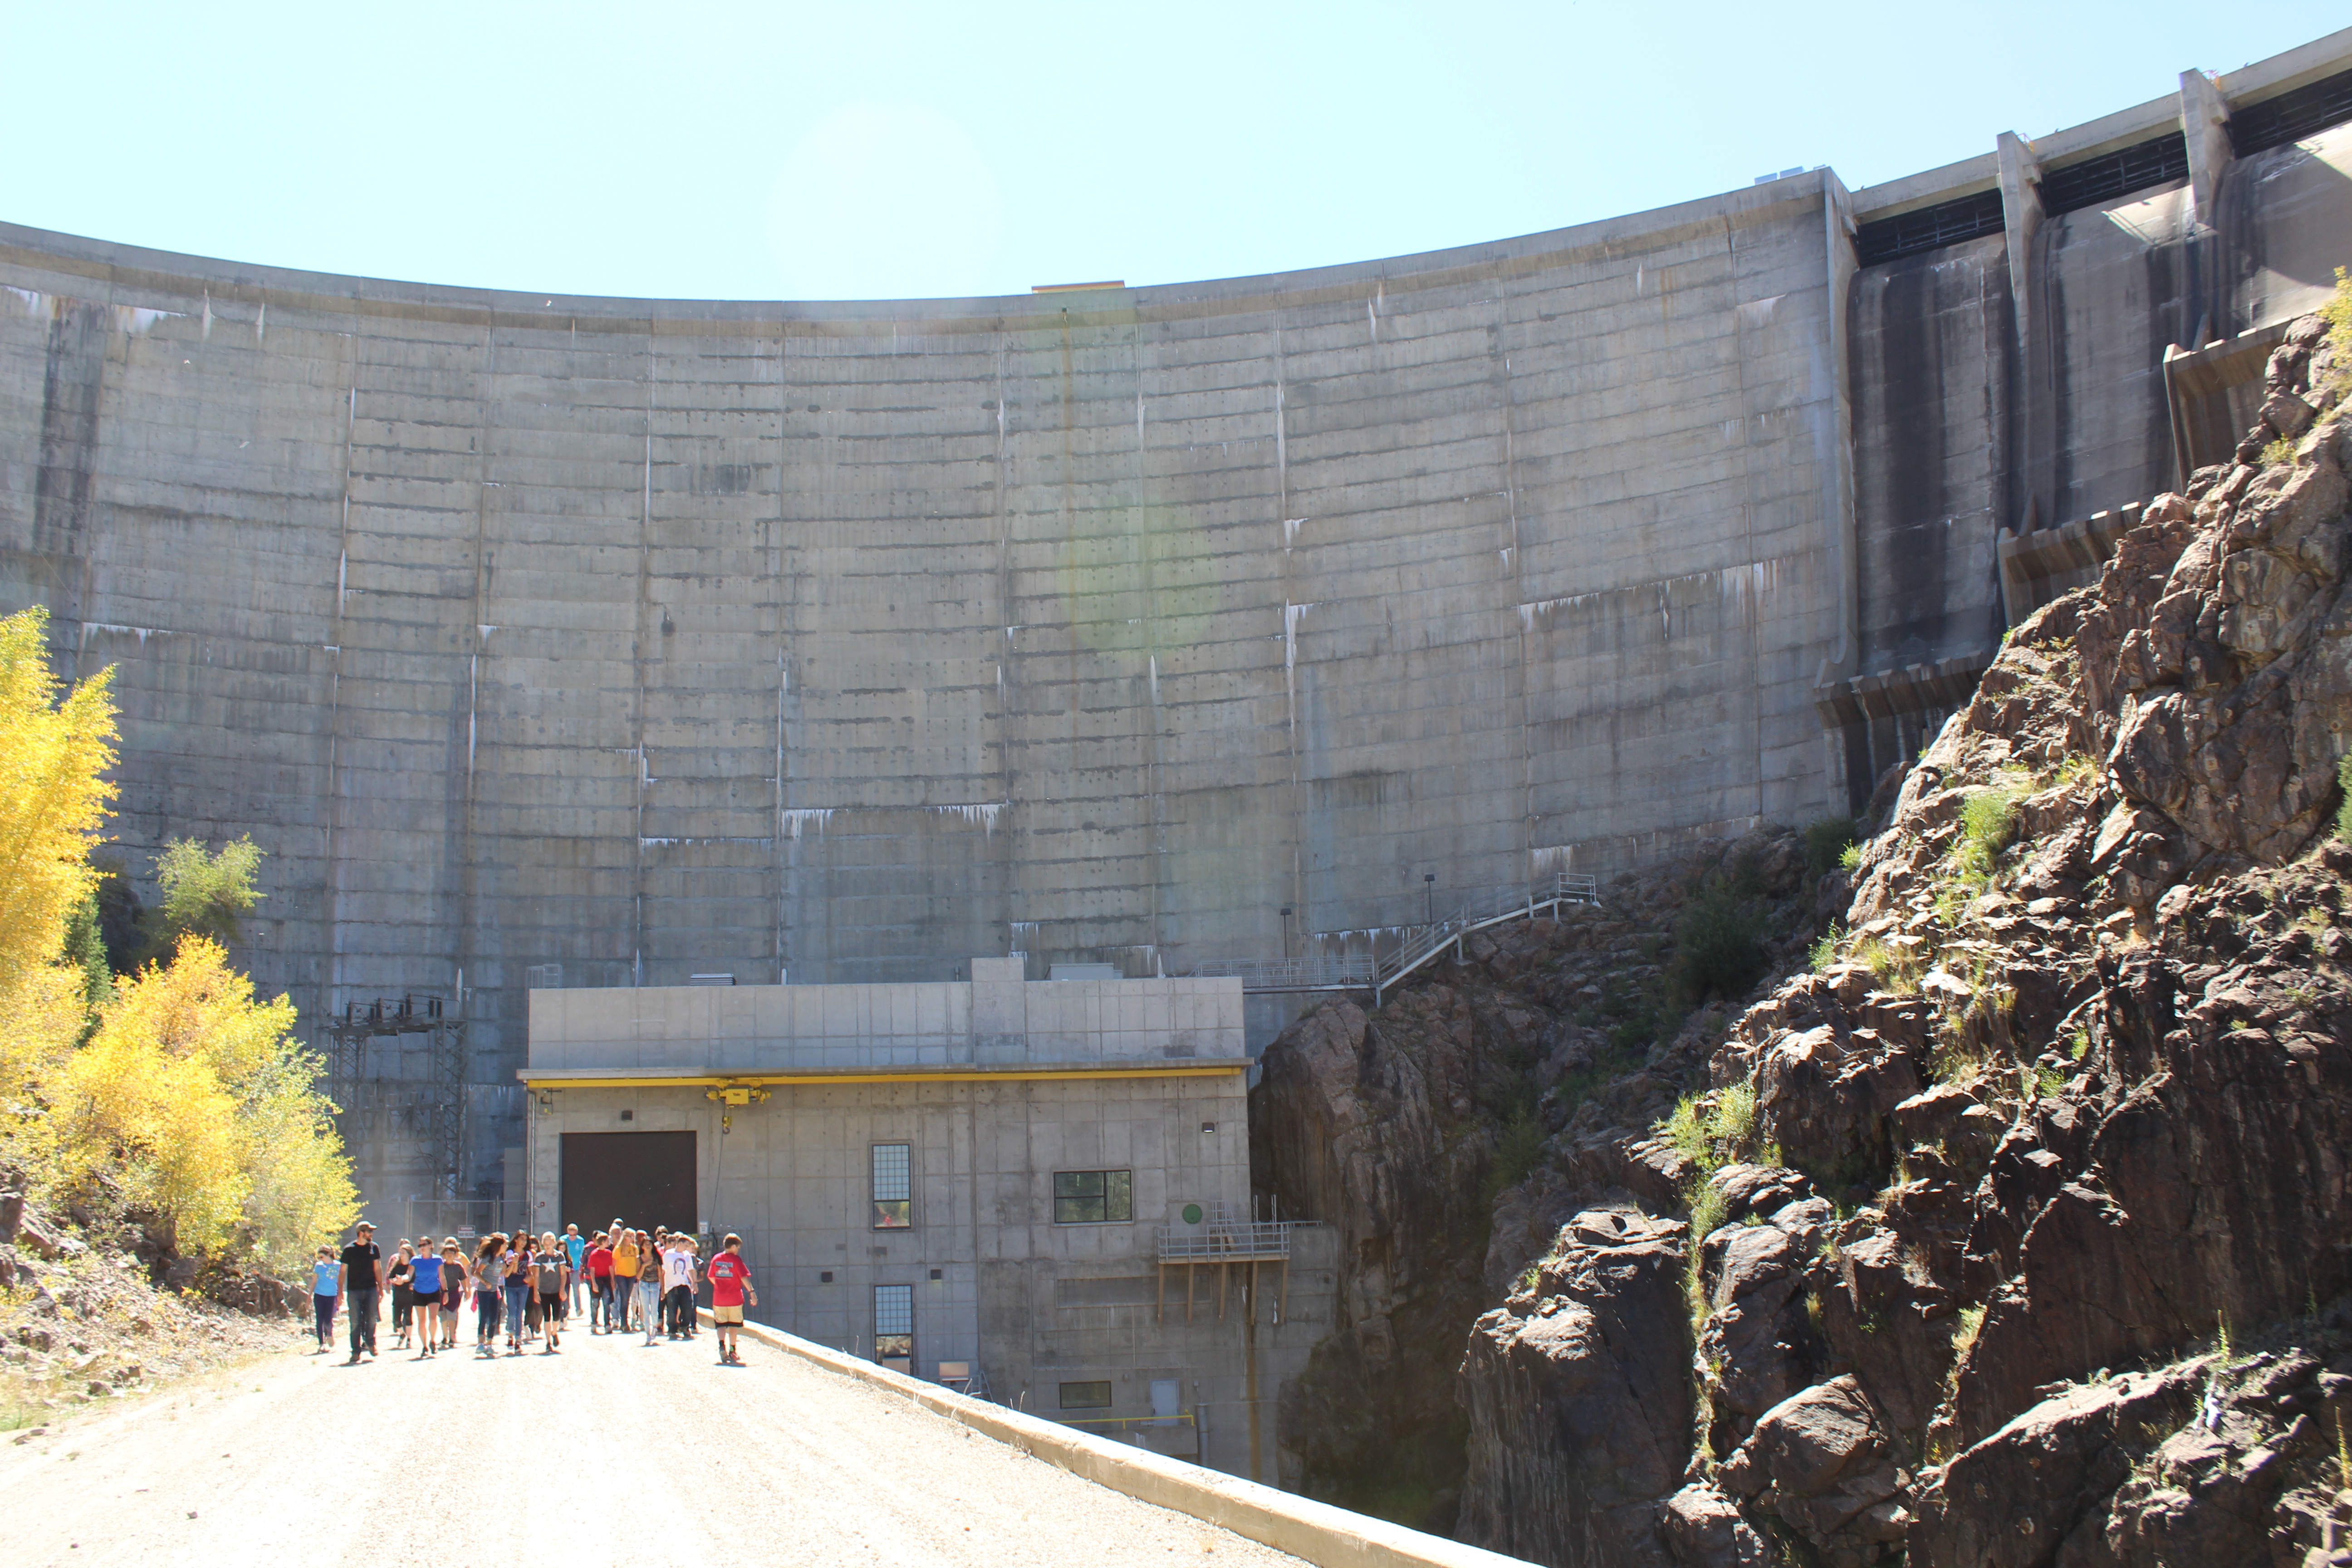 Seventh-graders from West Grand Middle School leaving a tour from inside Williams Fork dam.